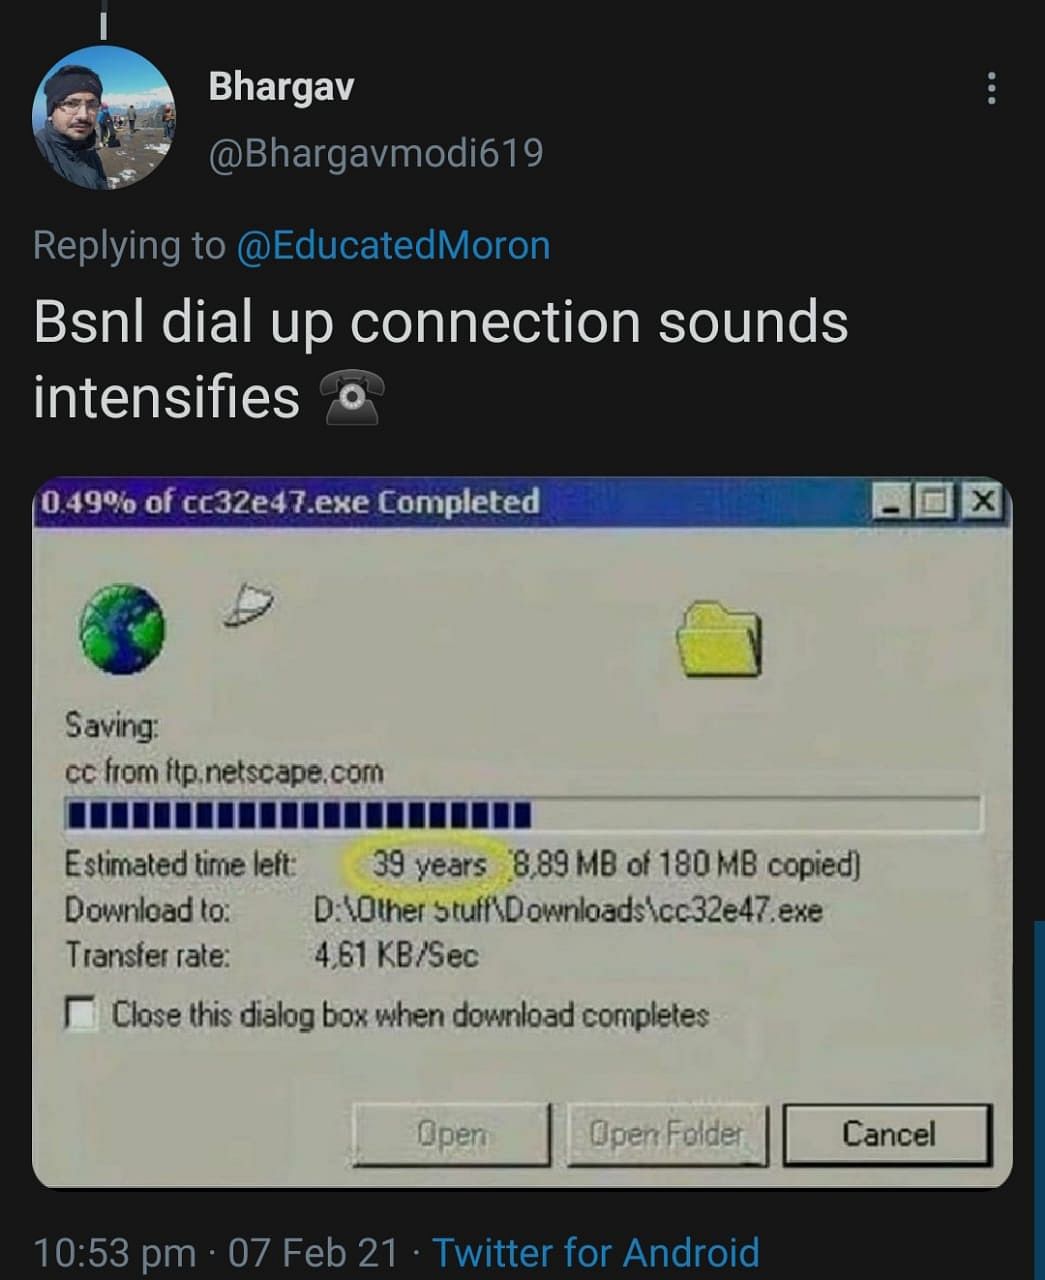 After a Twitter user shared an image of the old Windows Media Player, a wave of nostalgia hit everyone. 